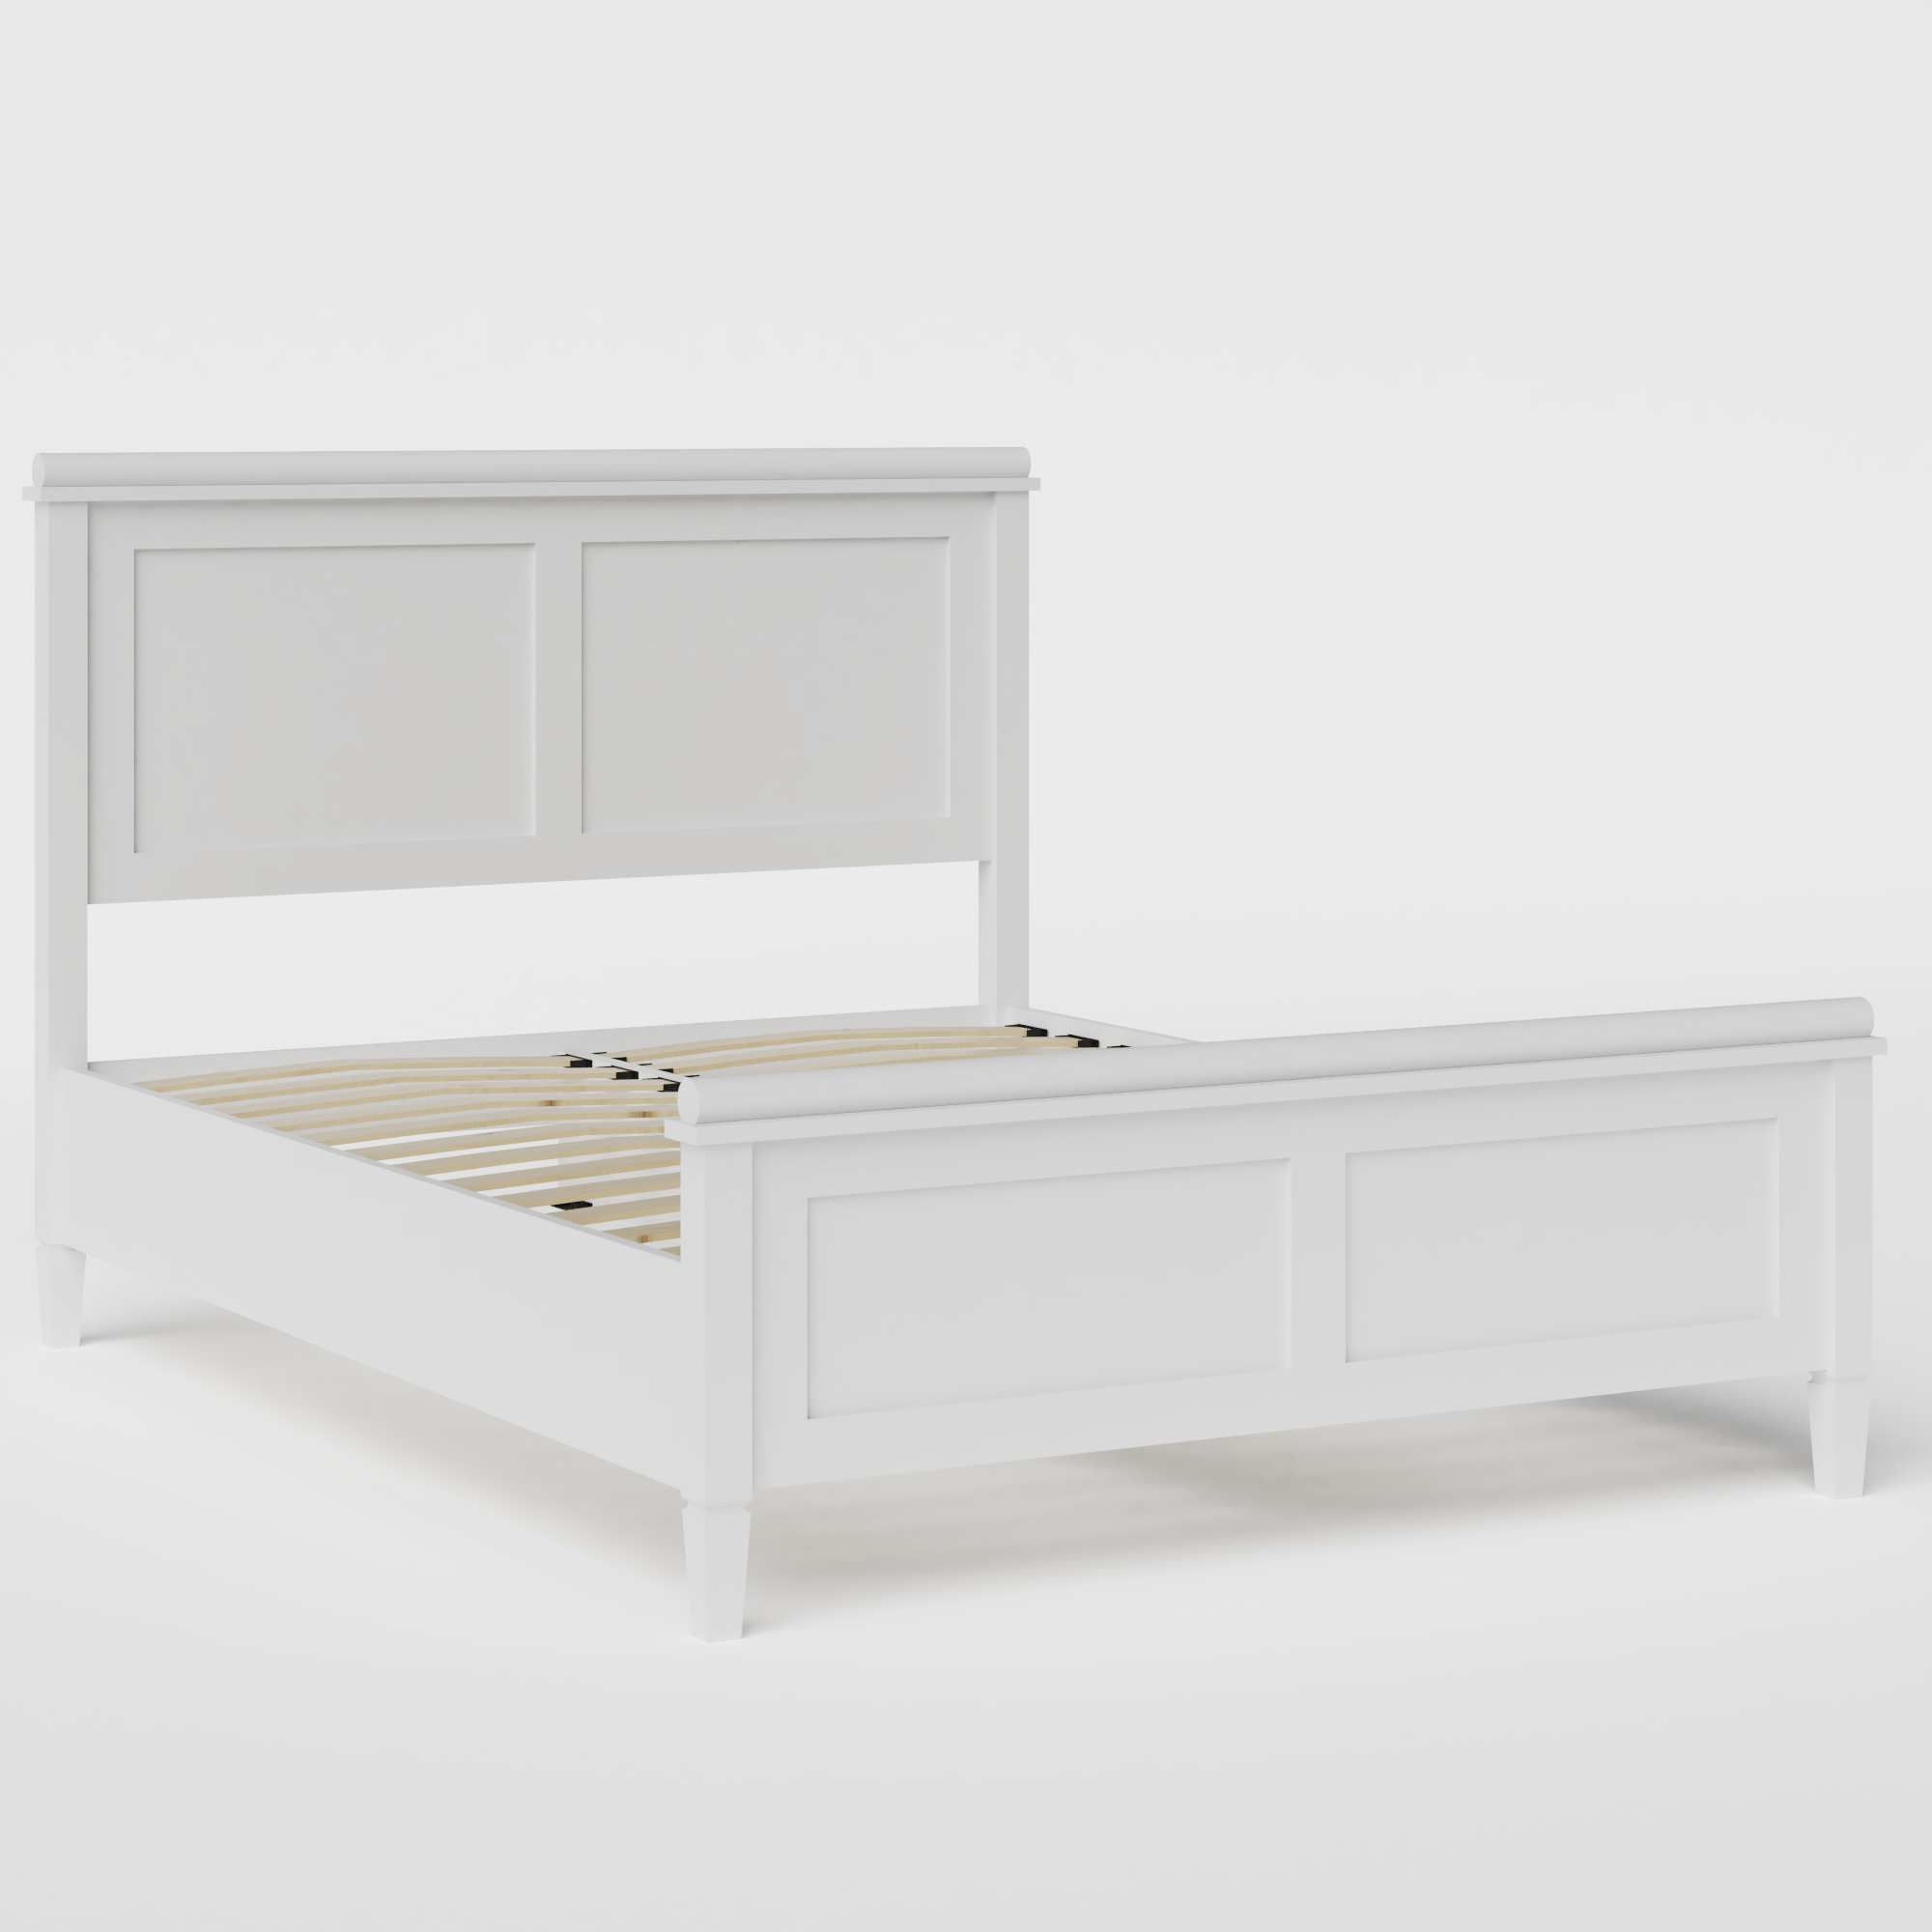 Nocturne Painted painted wood bed in white